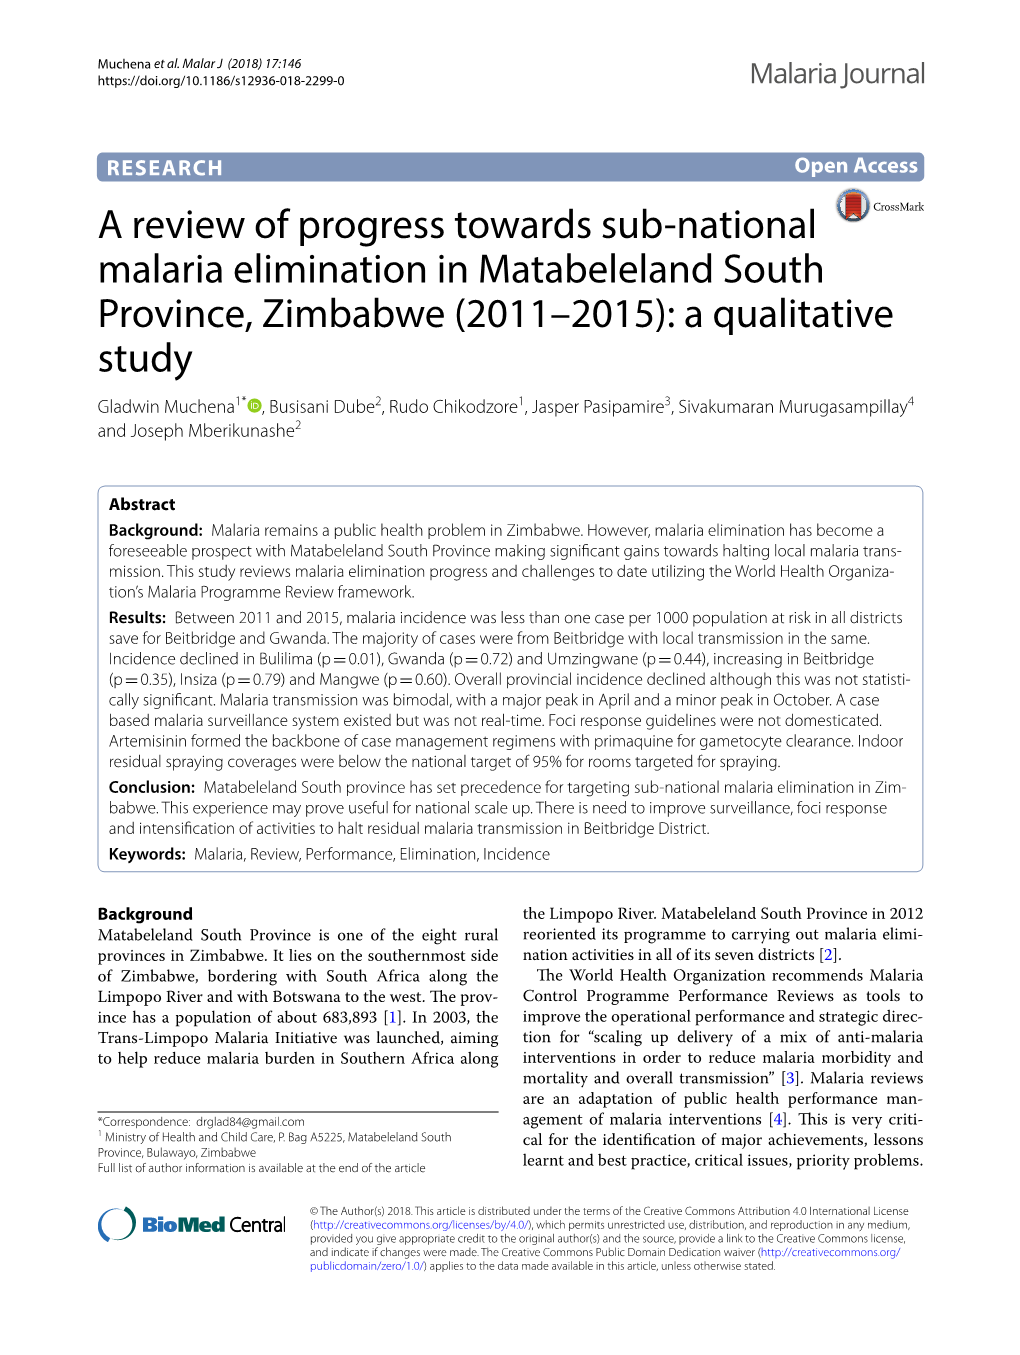 A Review of Progress Towards Sub-National Malaria Elimination In